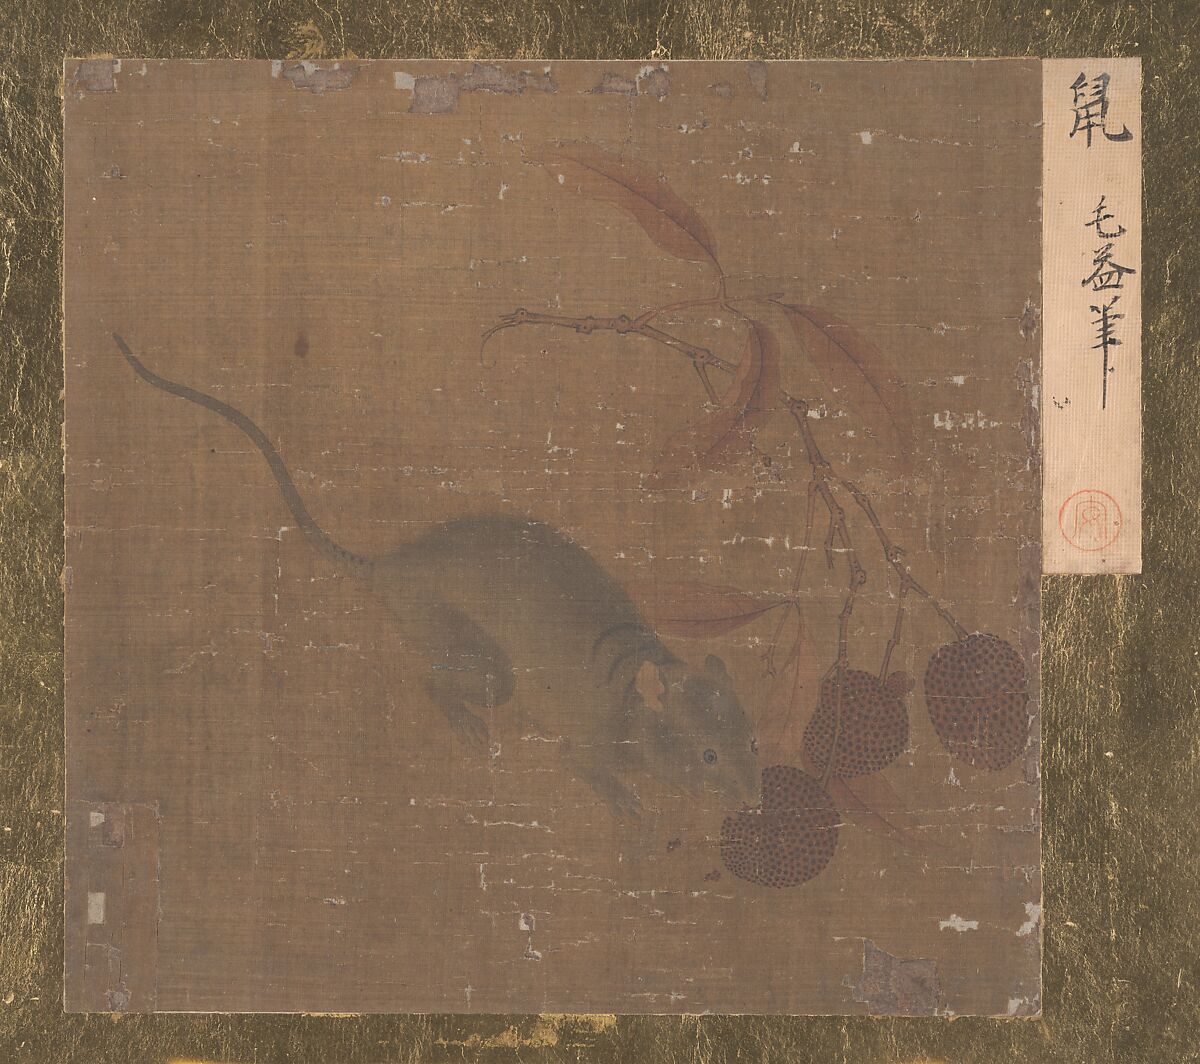 Mouse Eating Lichee Fruit, Unidentified artist, Album leaf; ink and color on silk, China 